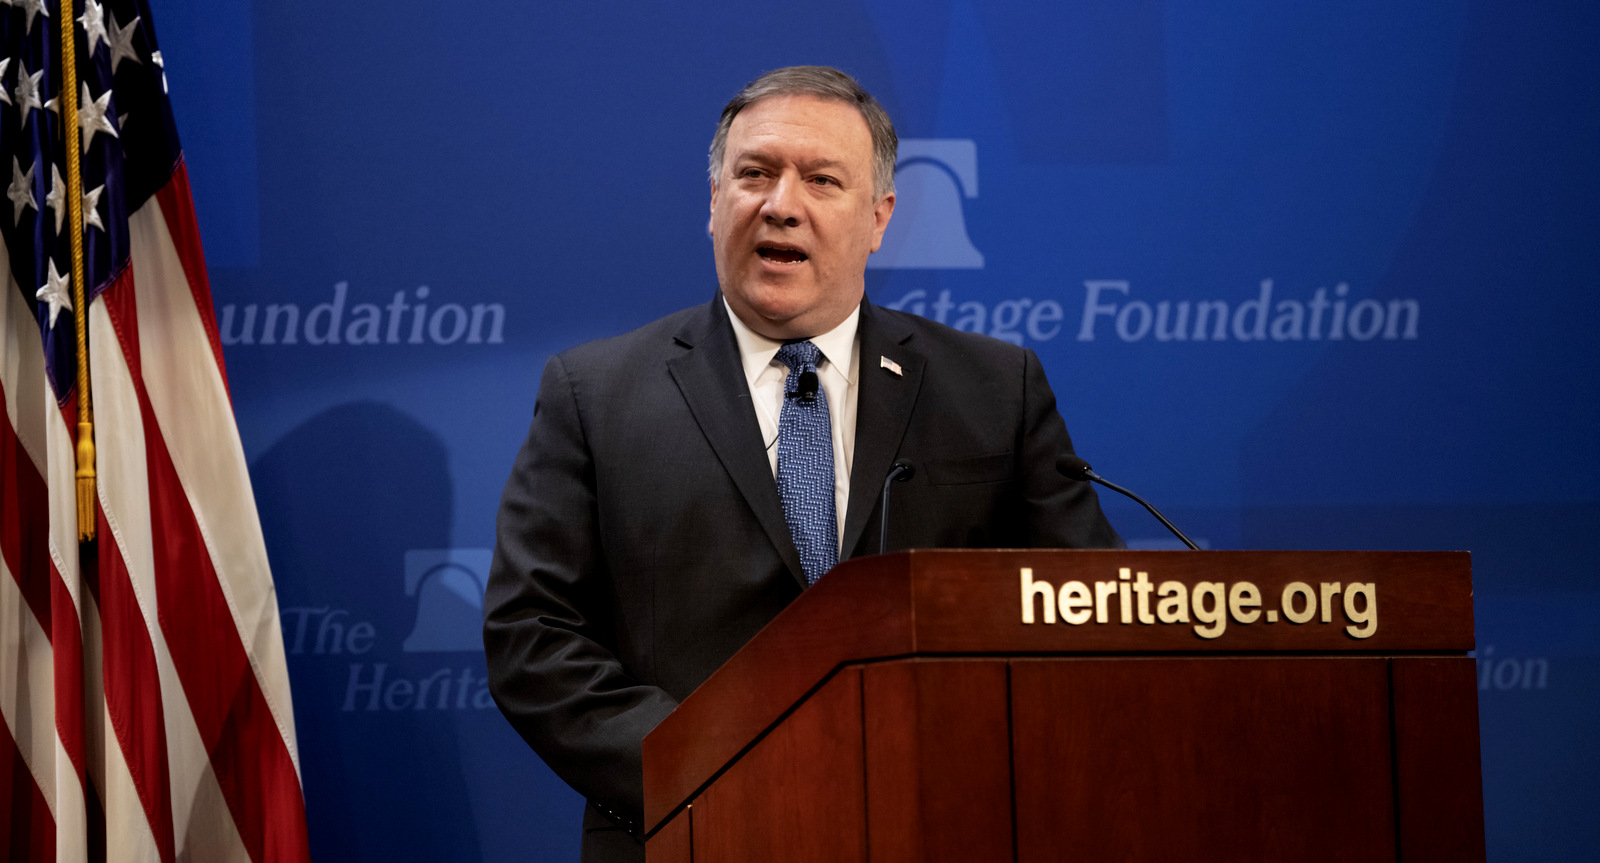 Secretary of State Mike Pompeo speaks at the Heritage Foundation, a conservative public policy think tank, in Washington, May 21, 2018. Pompeo issued a steep list of demands Monday that he said should be included in a nuclear treaty with Iran to replace the Obama-era deal, threatening "the strongest sanctions in history" if Iran doesn't change course. (AP/J. Scott Applewhite)